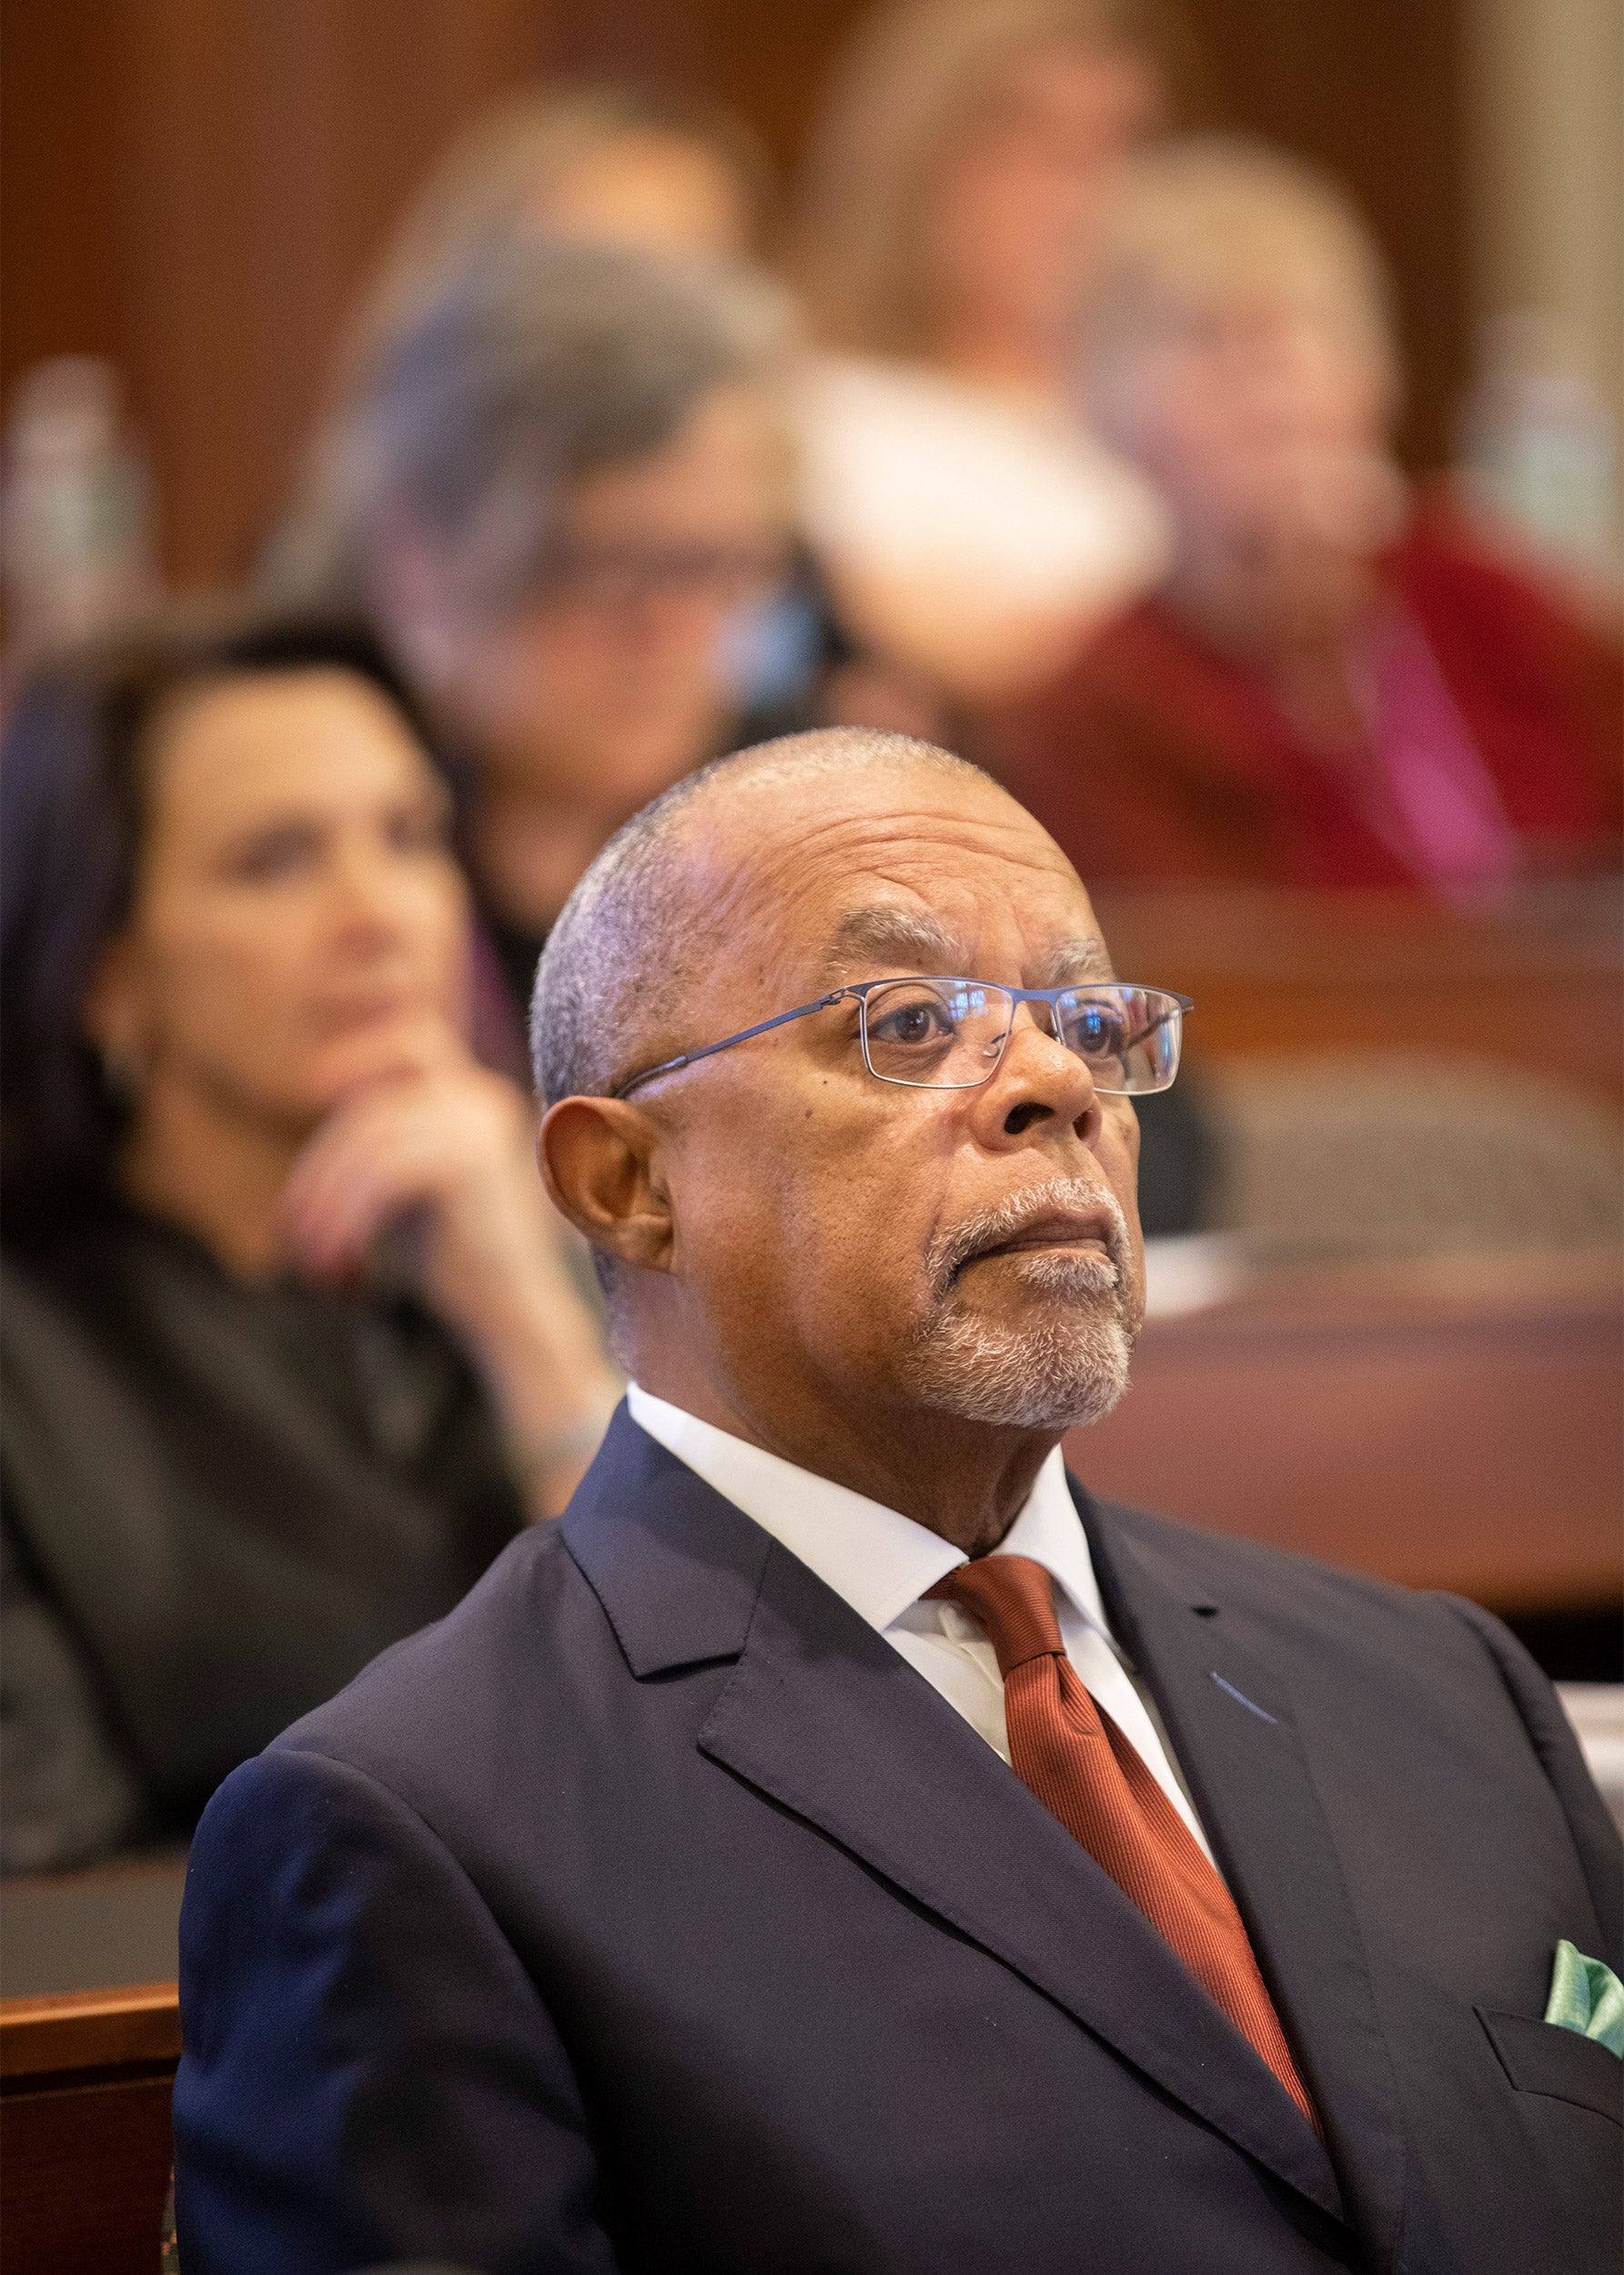 Henry Louis Gates Jr. sitting among people in audience.